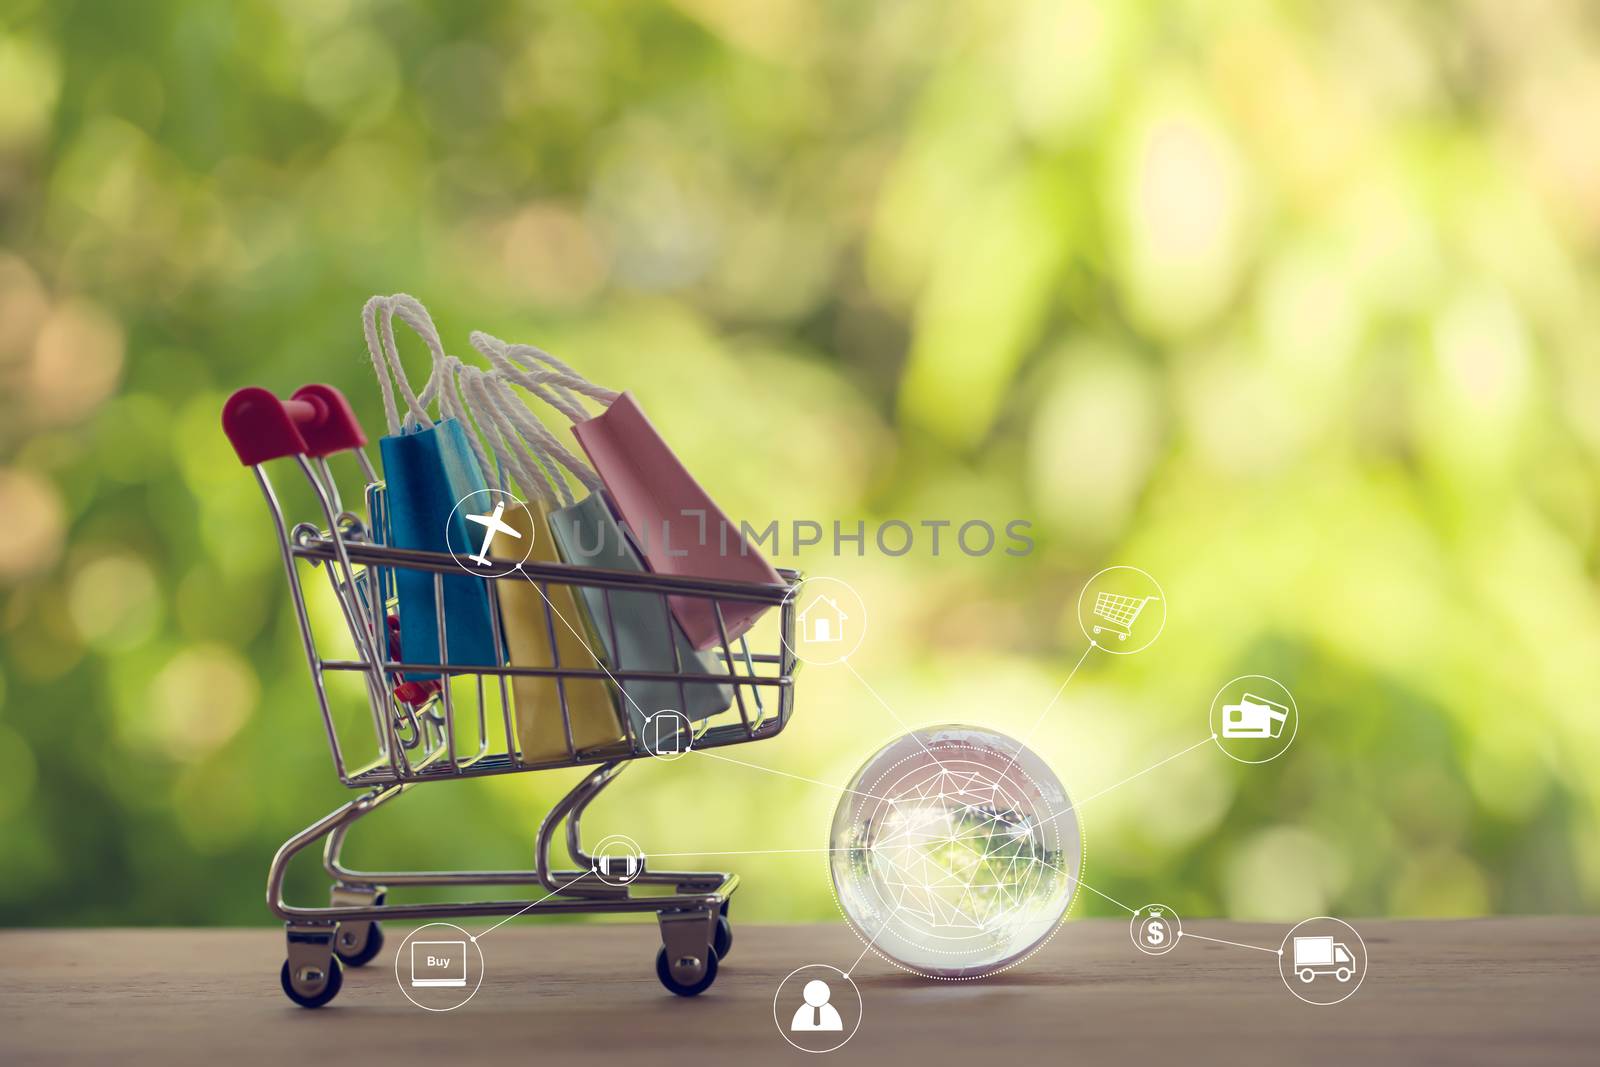 Online shopping, e-commerce concept: Paper shopping bags in a trolley or shopping cart with icon customer network connection. purchase of products on internet can purchase goods from foreign countries by setila